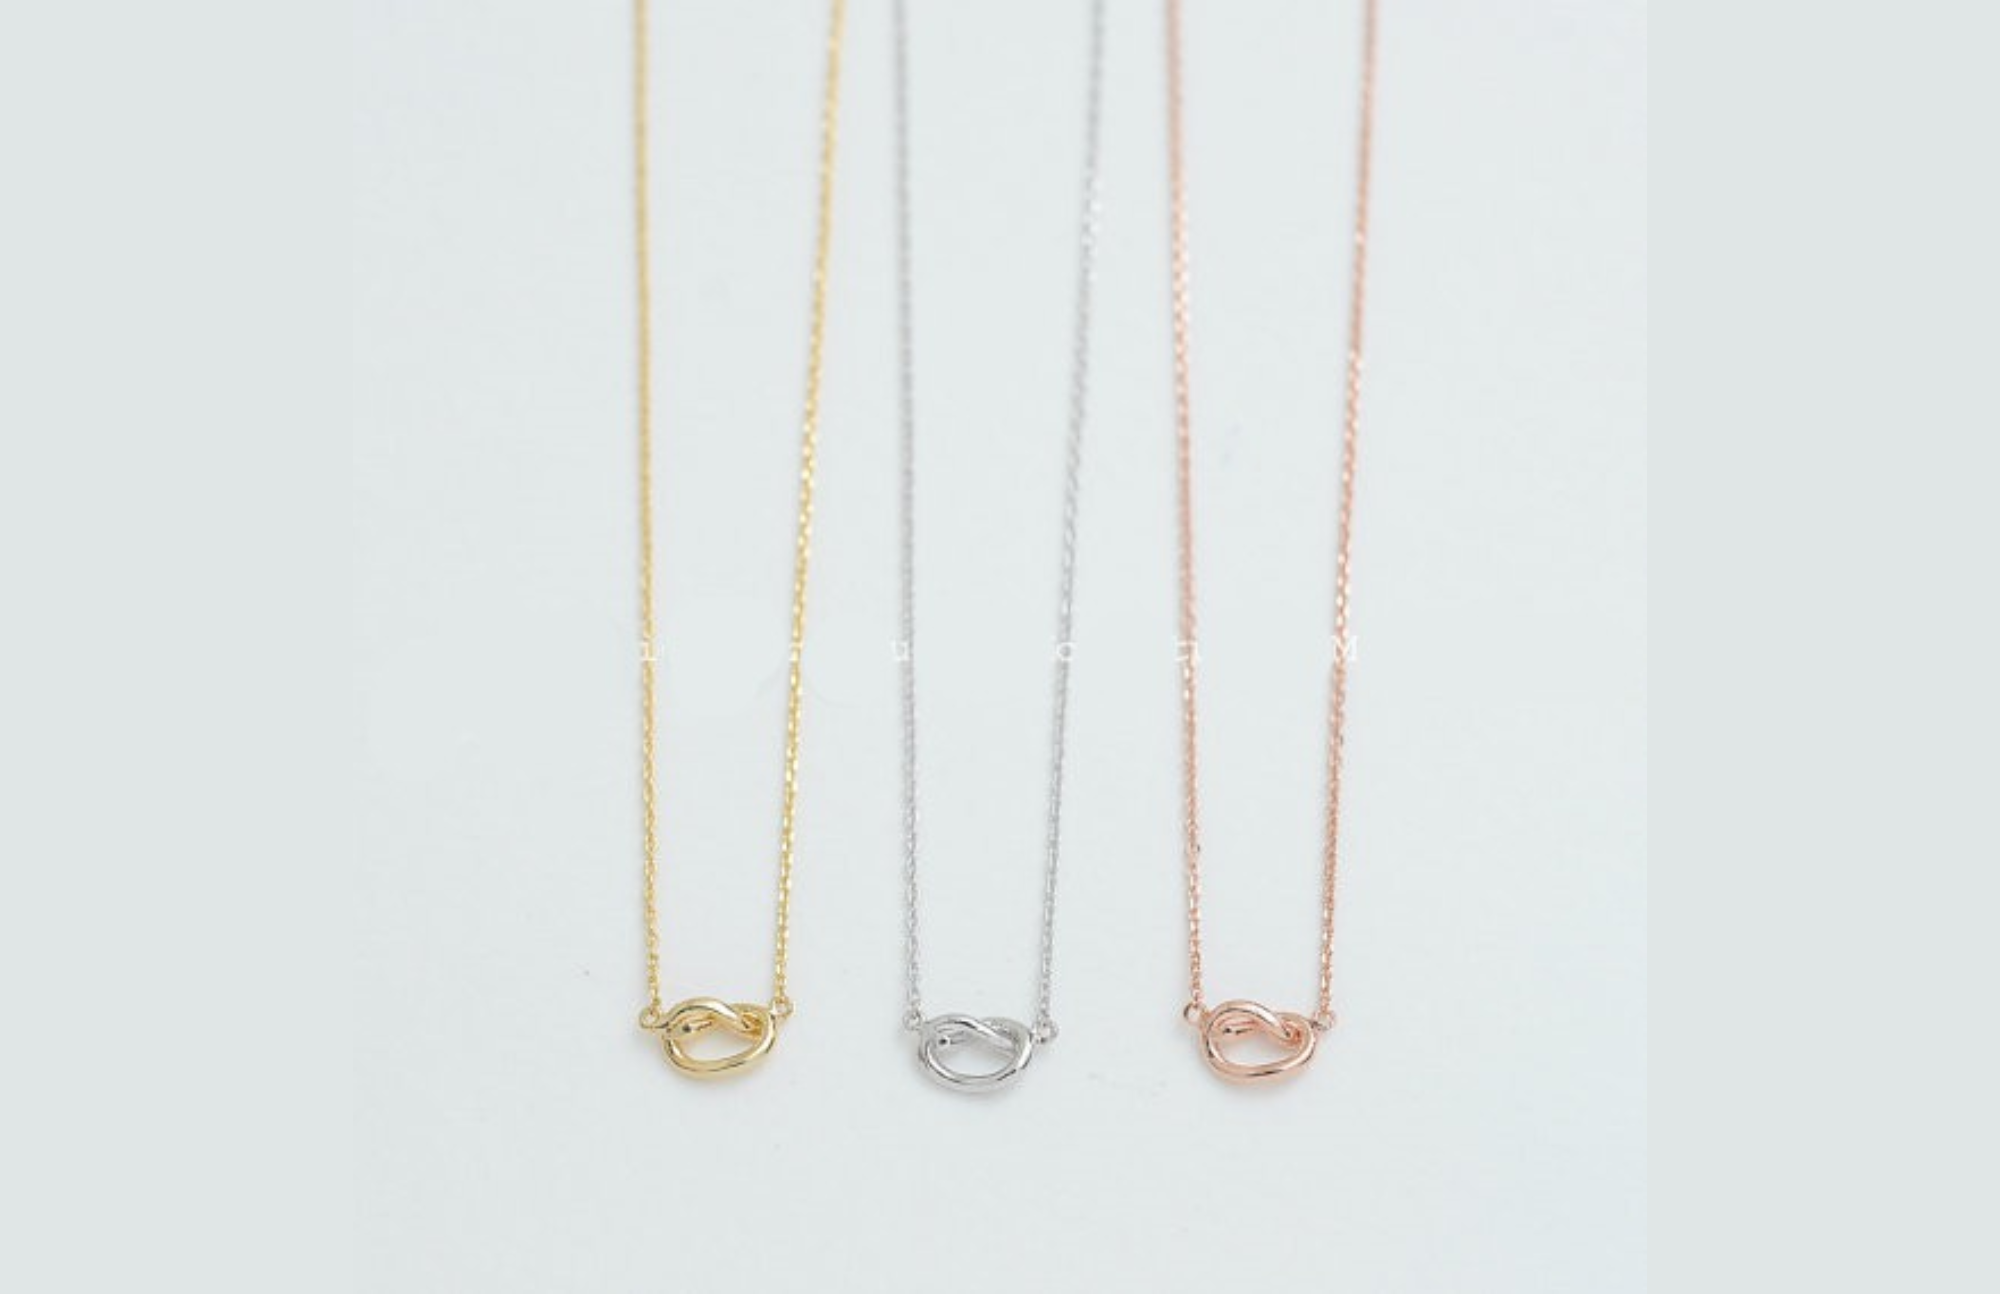 Gold, silver, and bronze knot necklaces